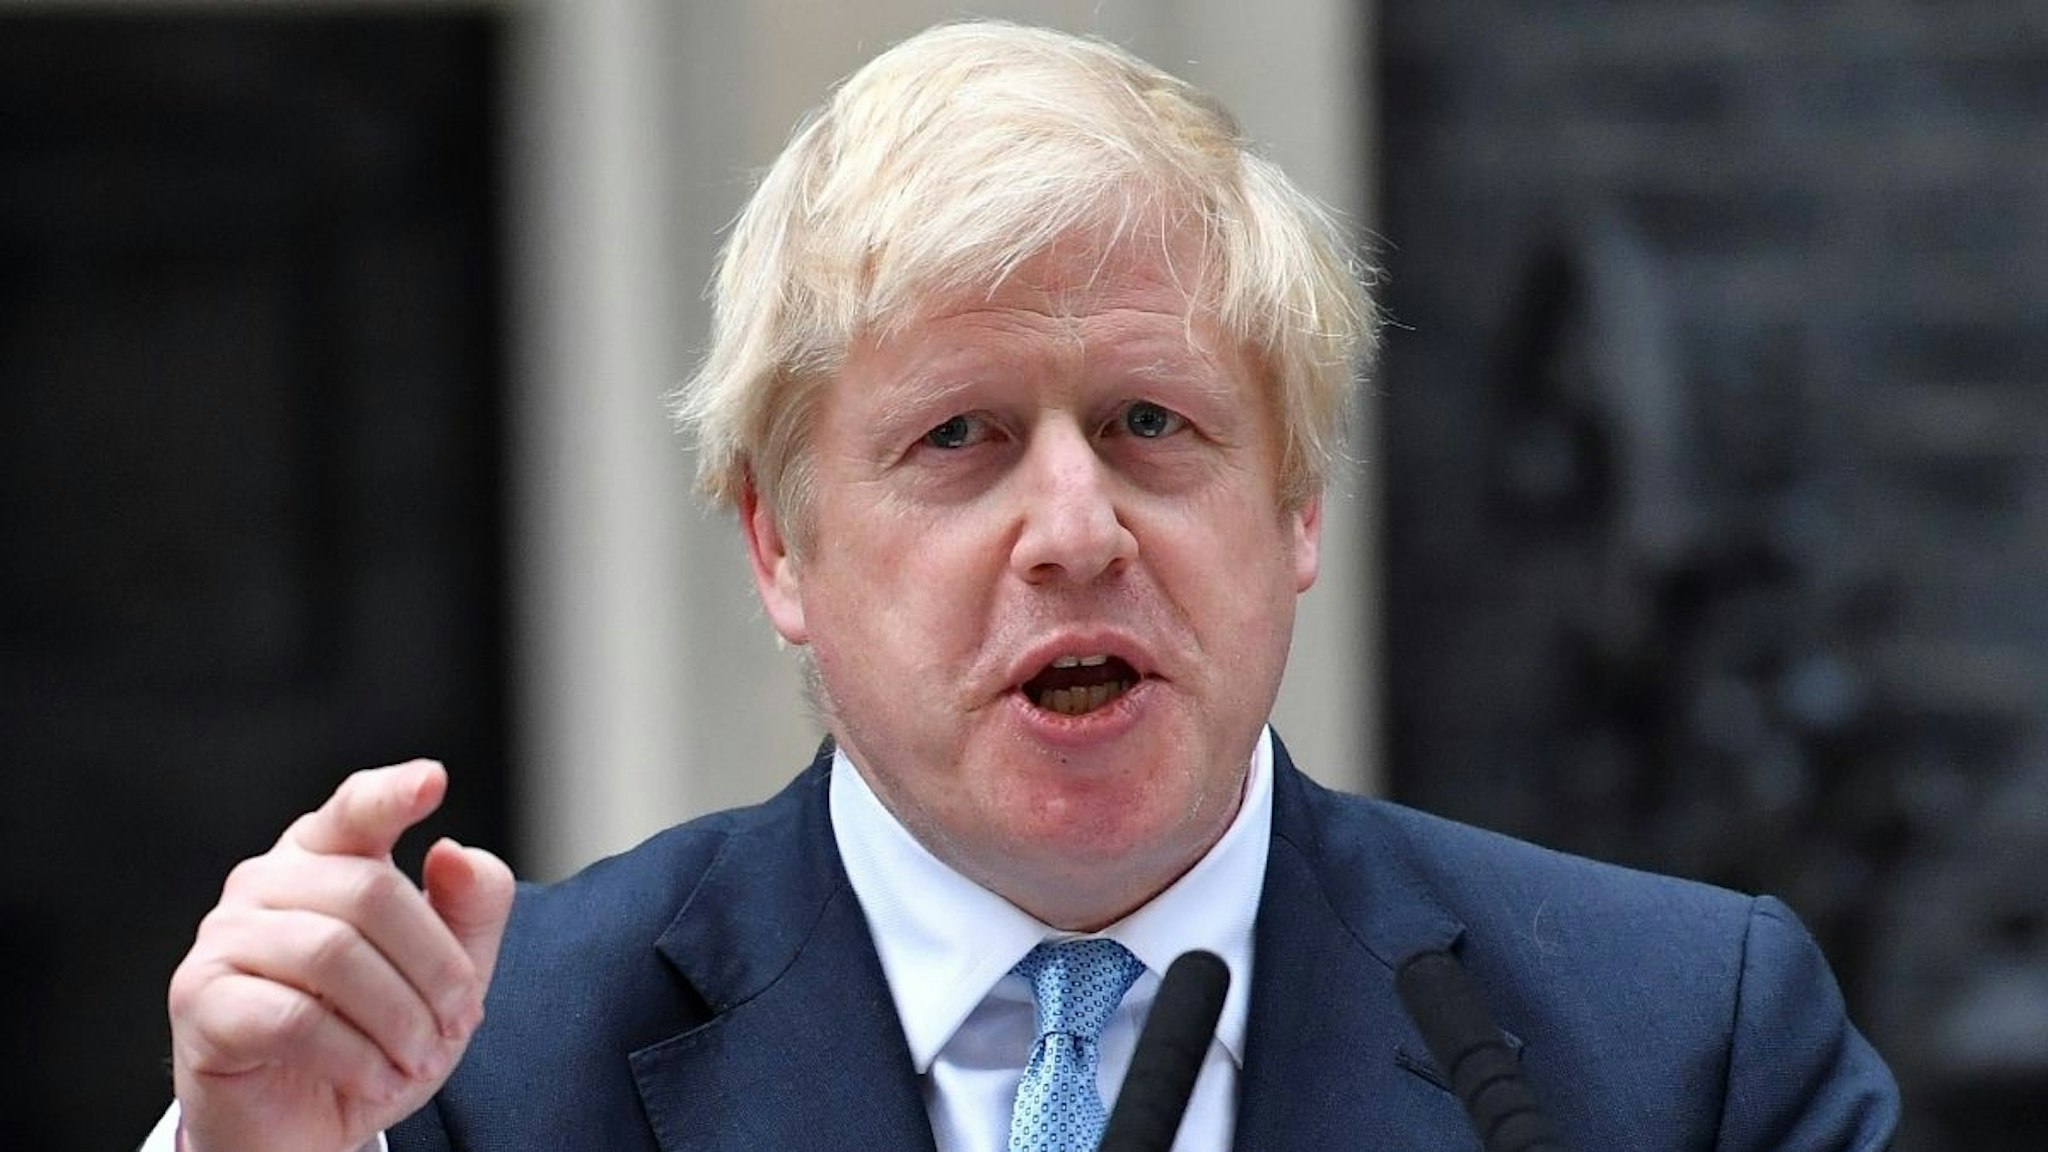 Britain's Prime Minister Boris Johnson delivers a statement outside 10 Downing Street in central London on September 2, 2019.